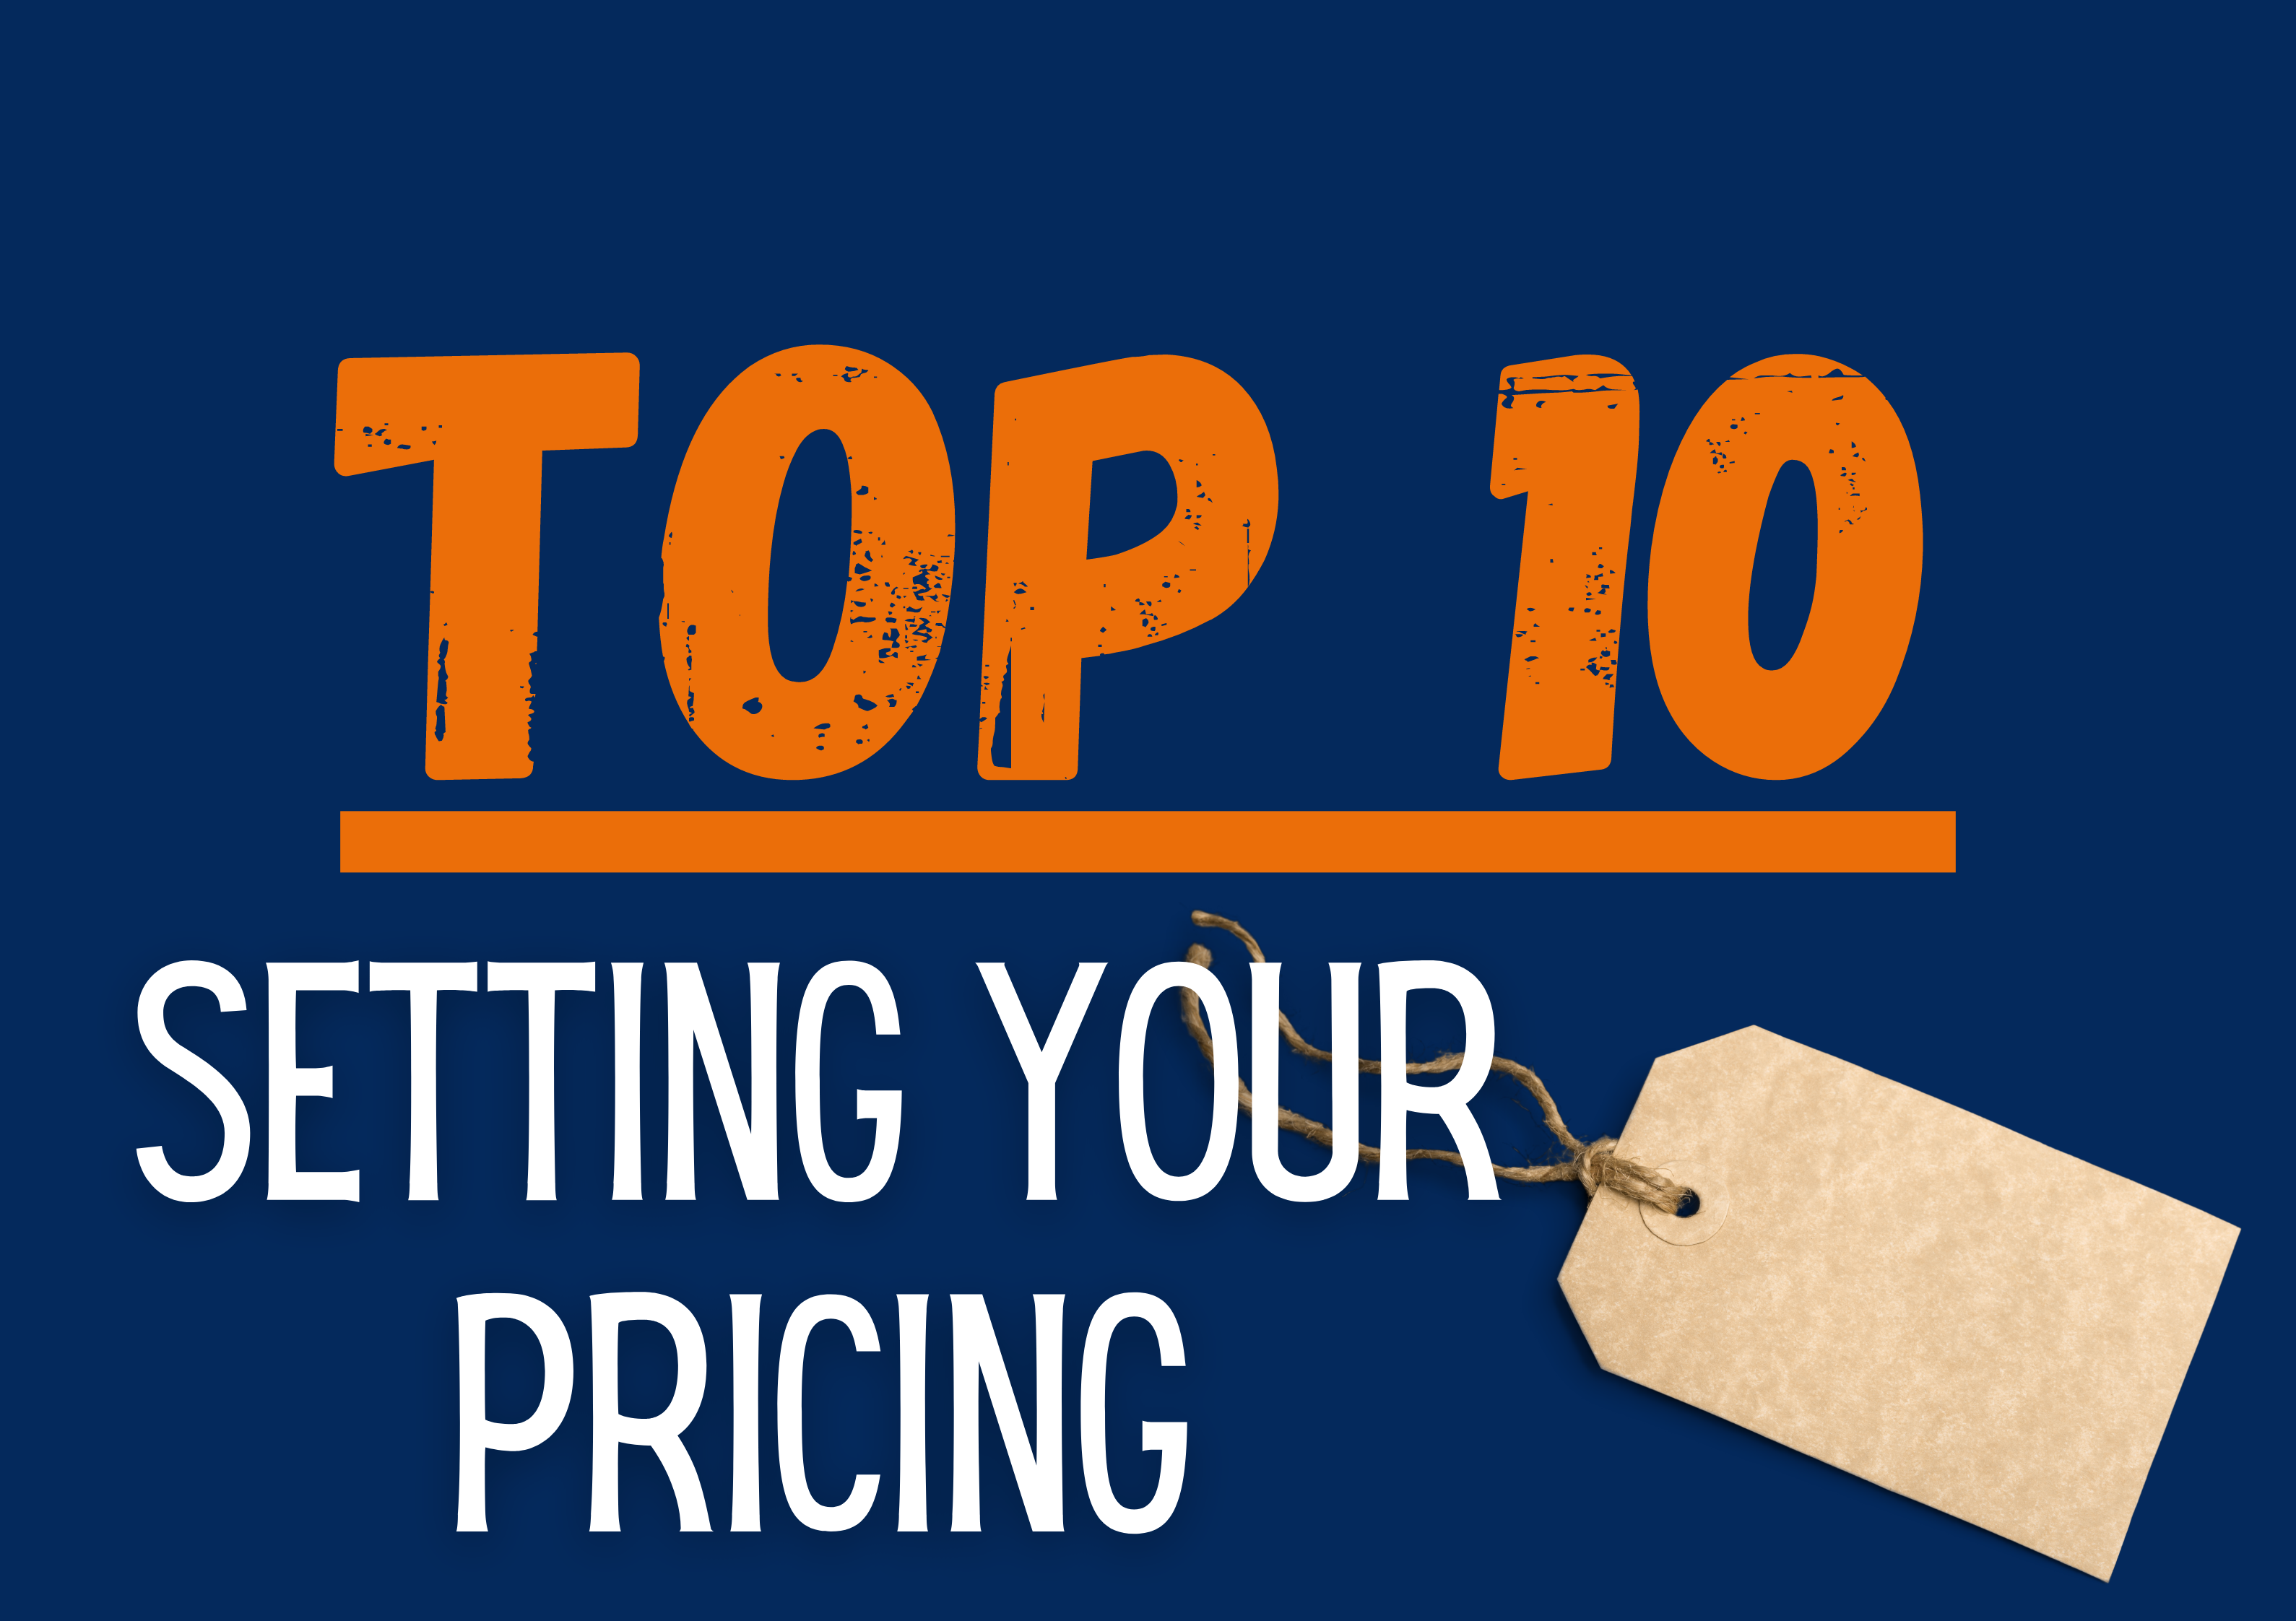 Top Ten Guide: Setting Your Pricing